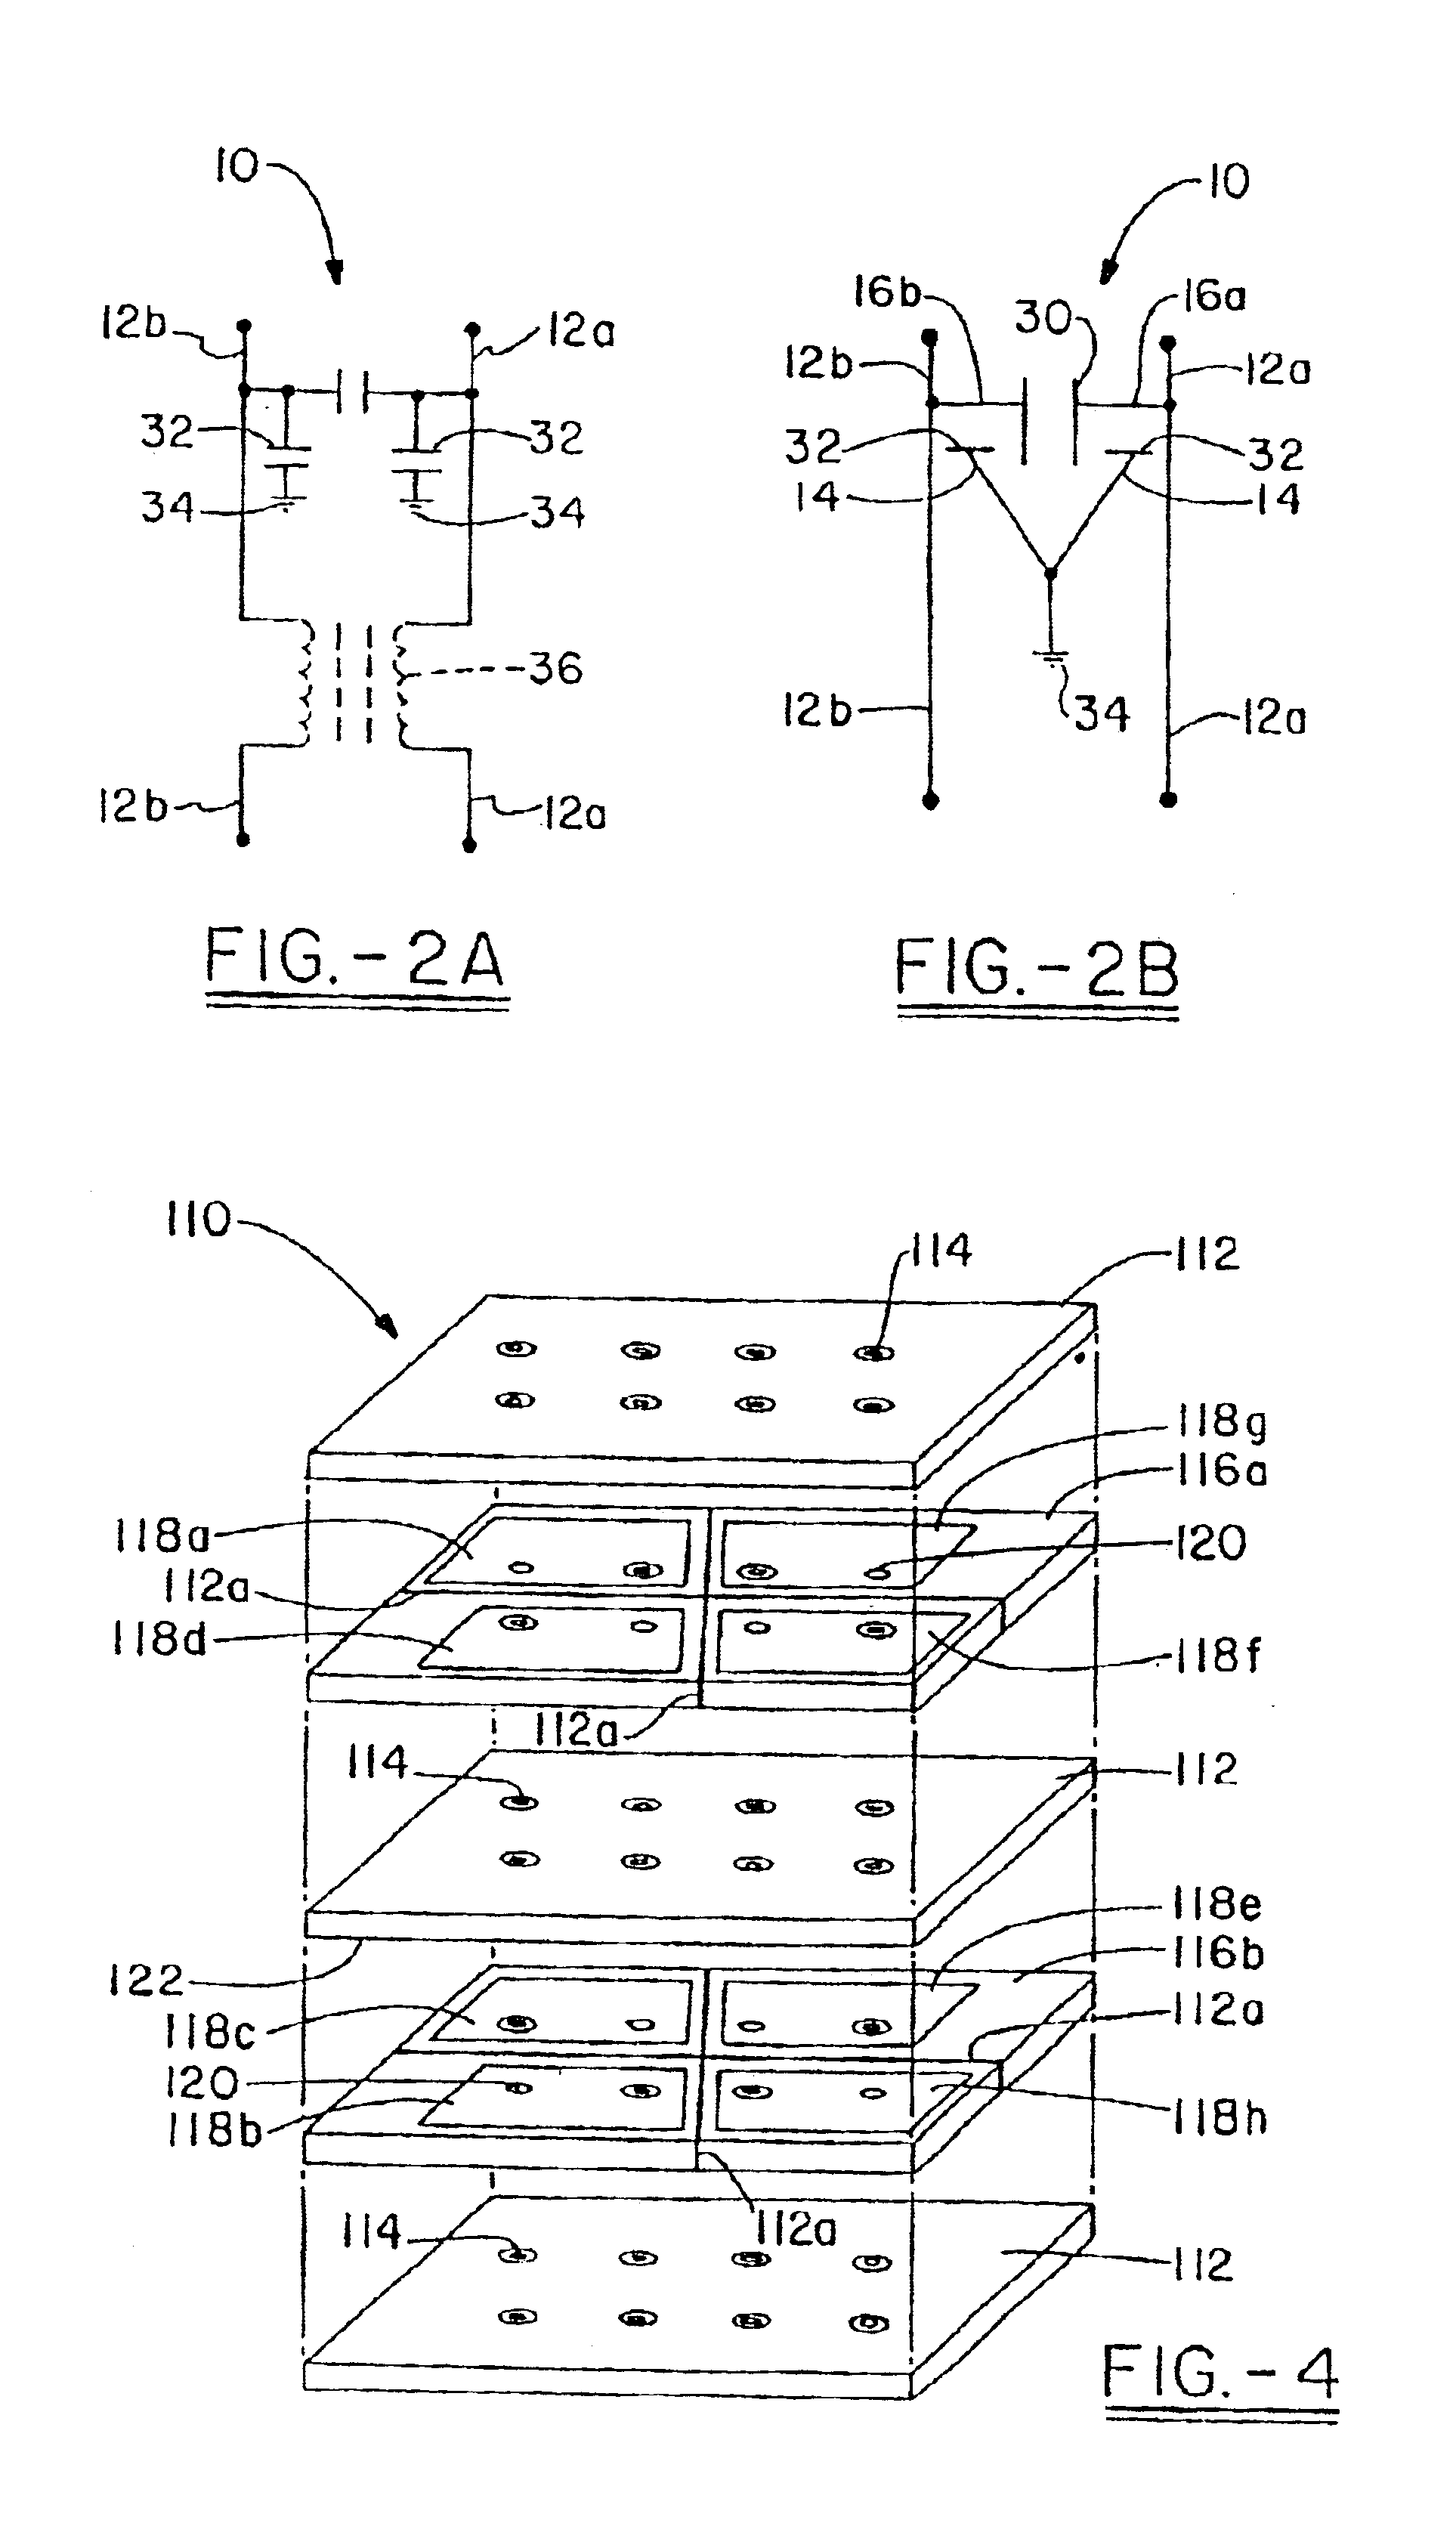 Paired multi-layered dielectric independent passive component architecture resulting in differential and common mode filtering with surge protection in one integrated package